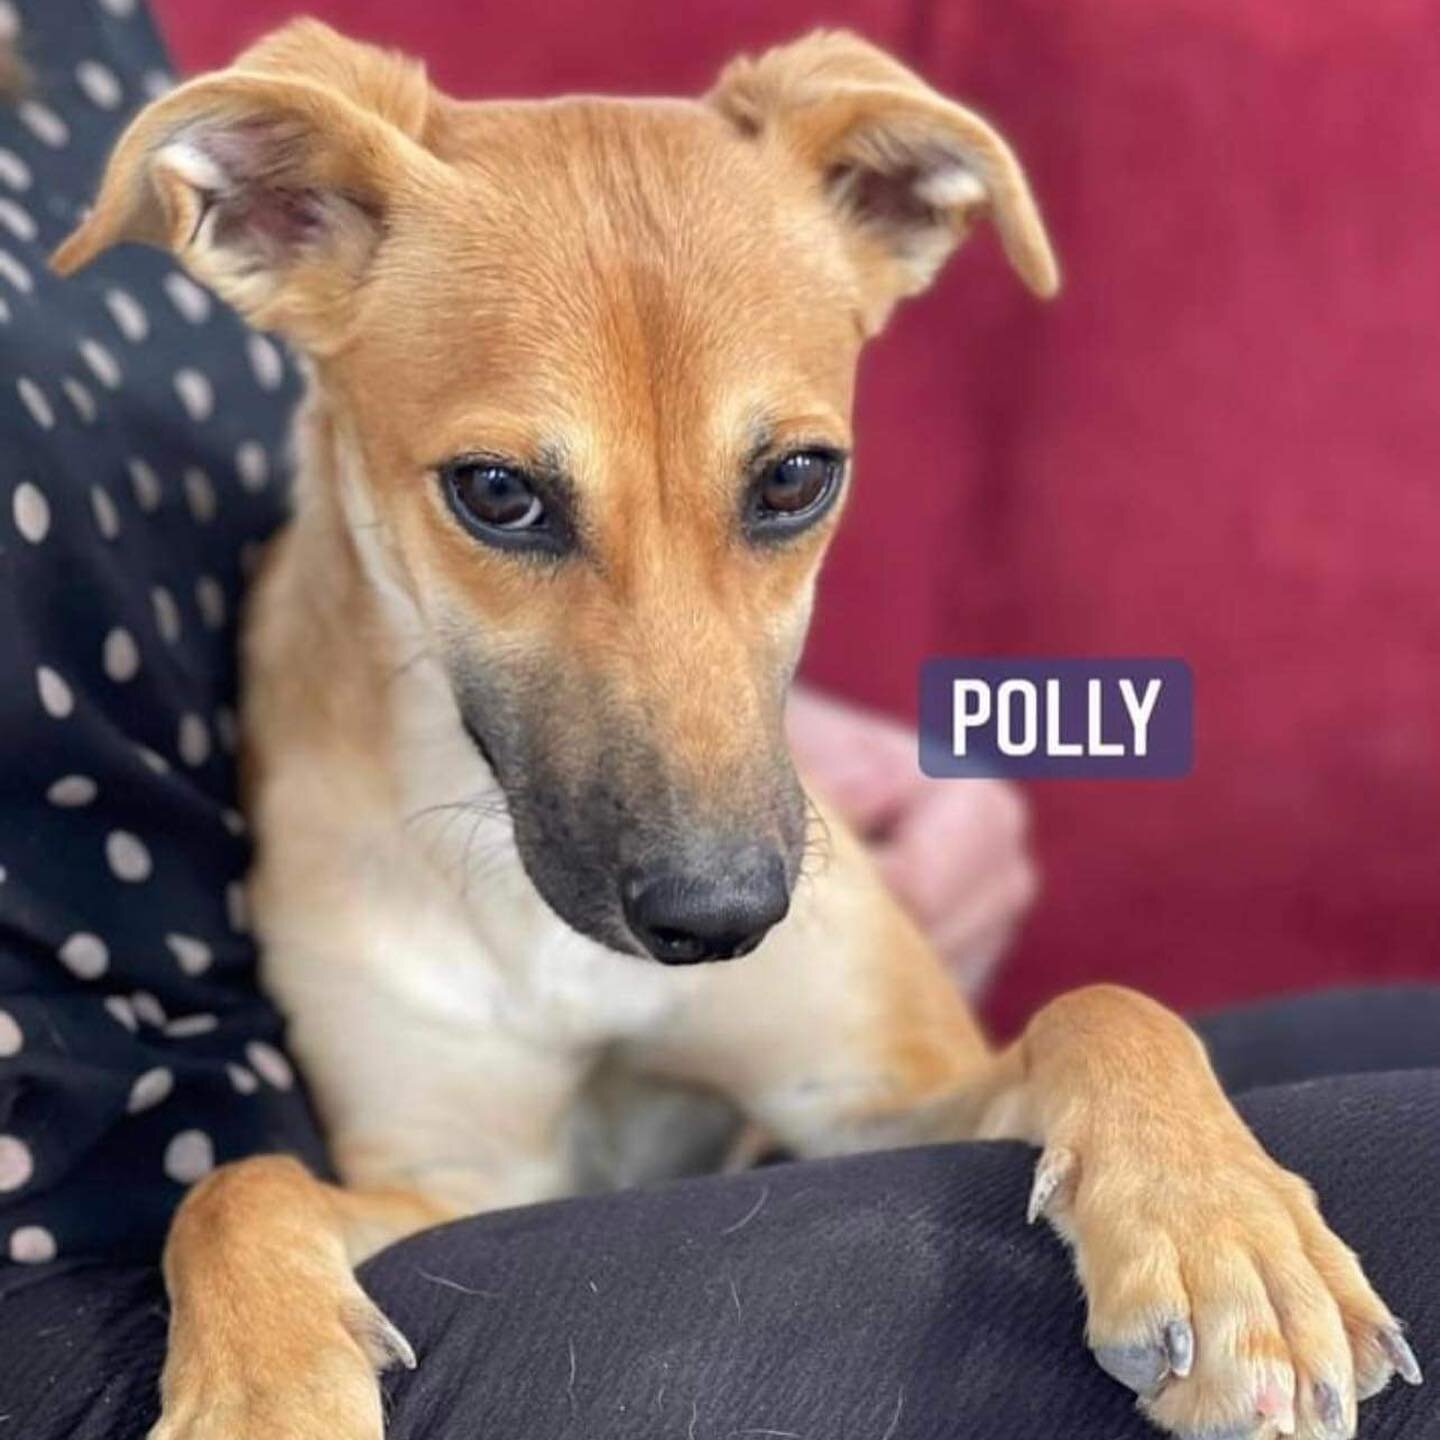 Meet sweet POLLY! &hearts;️
A 7 month old girl just 8 kilos! She will remain small. Mum is 12 kilos. She is a loving, cuddly, playful puppy, she is excellent with all dogs of all sizes, and anyone she has met! The cutest thing ever! Well socialised, 